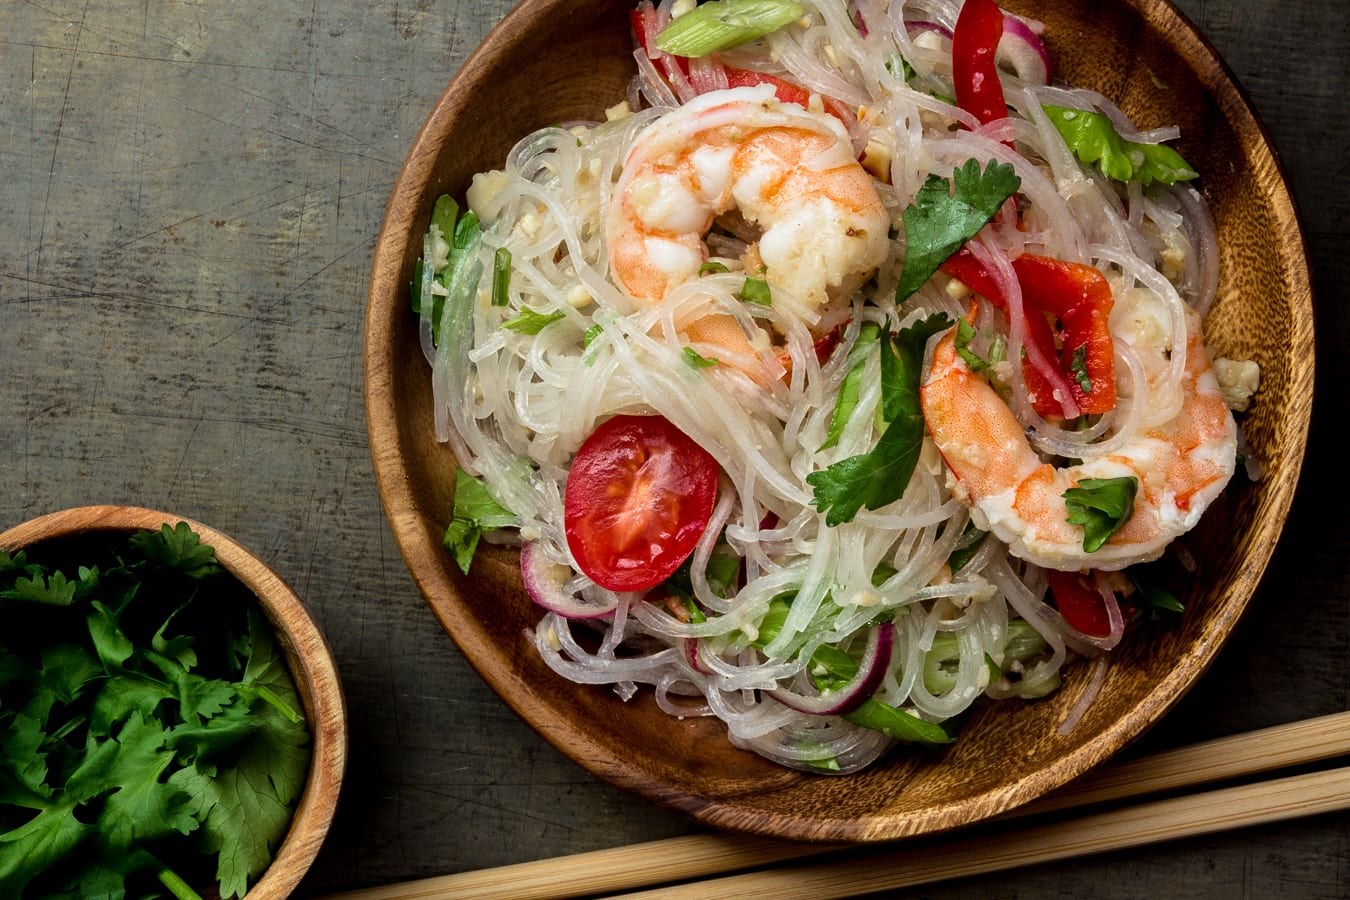 Thai glass noodle salad (Yum Woon Sen) with large shrimp served on a wooden plate on a metal table.